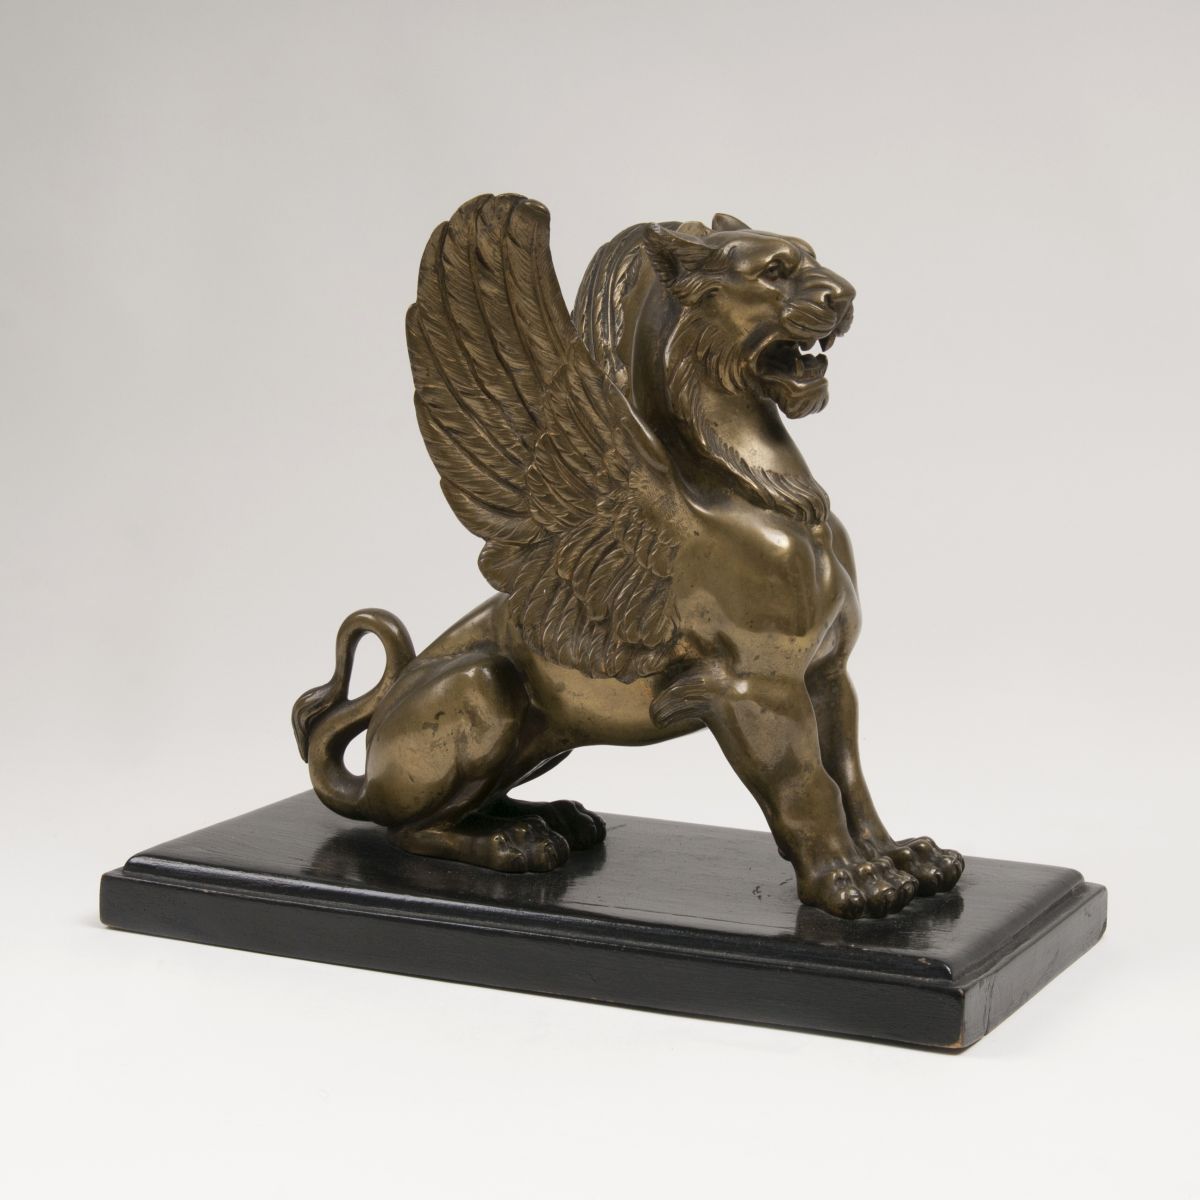 A Bronze-Figure 'Sitting winged lion'